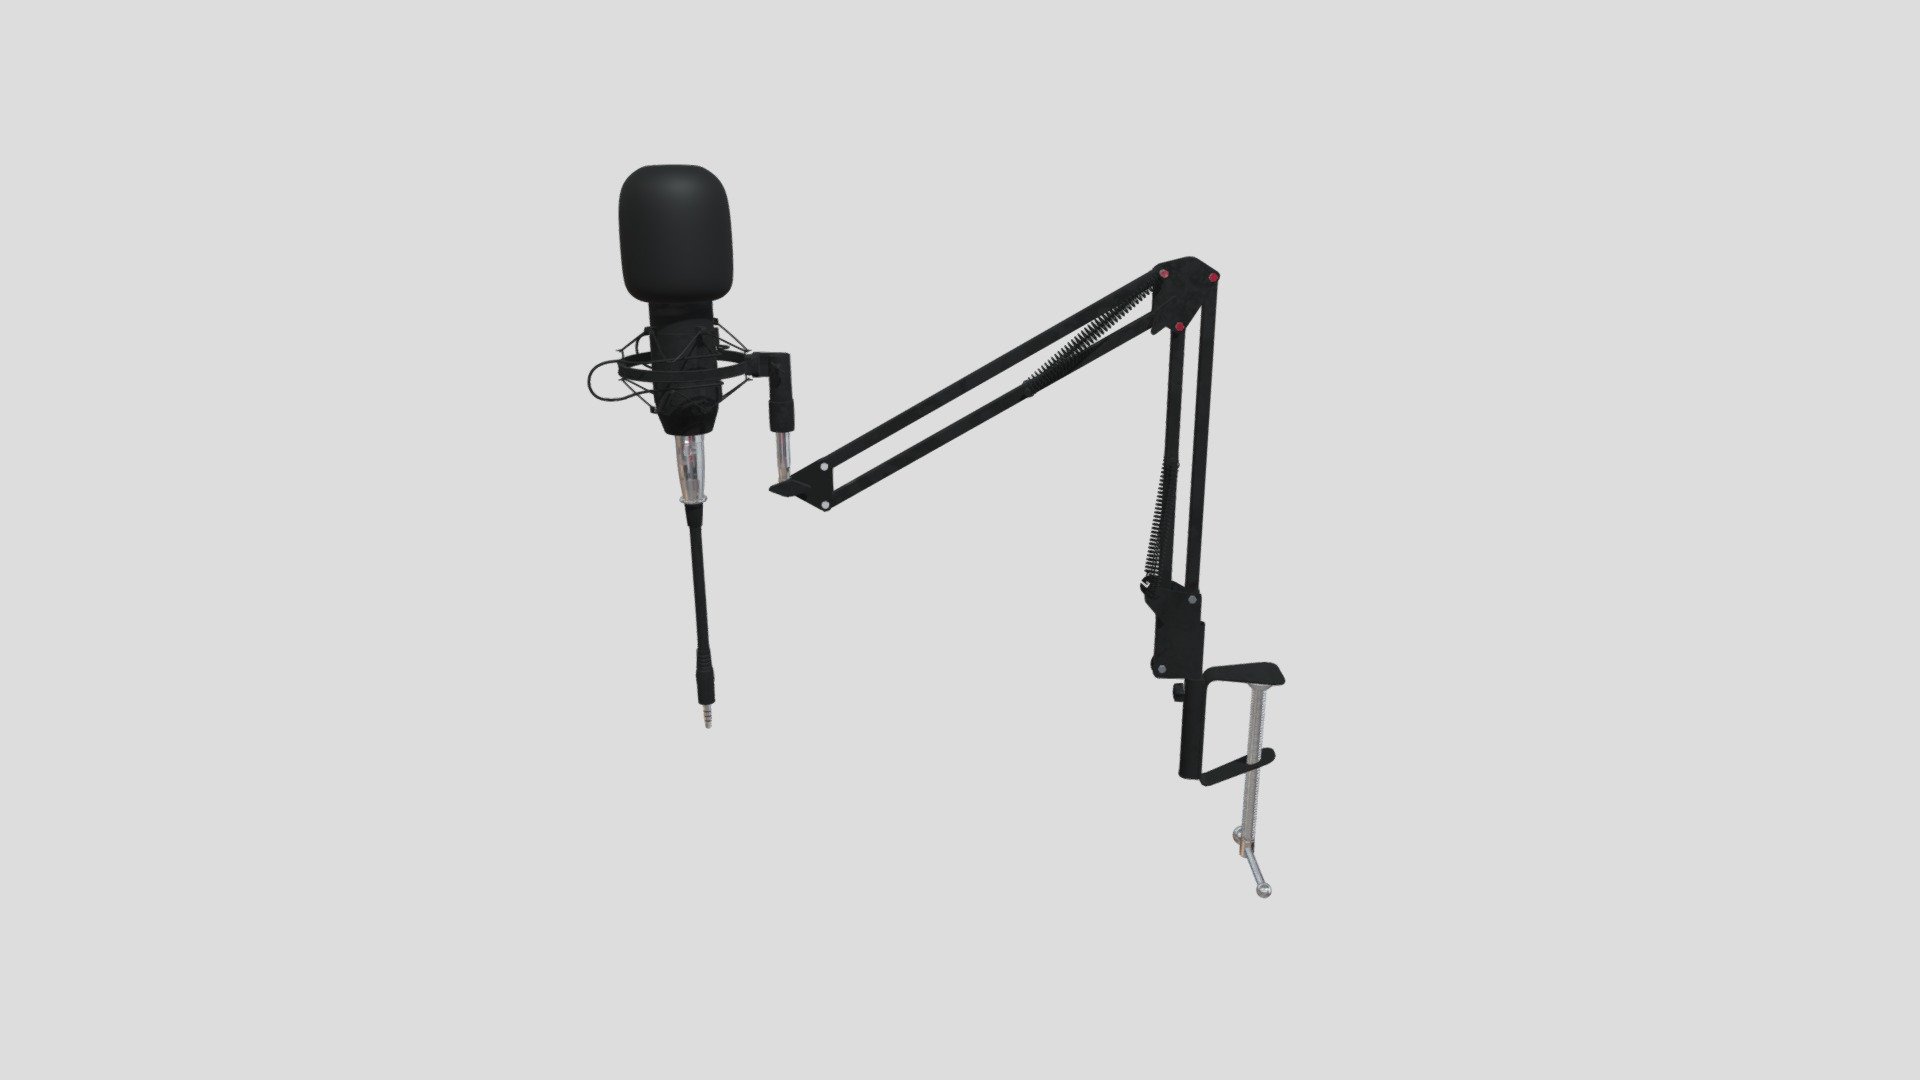 Buy it here: https://www.cgtr//ader.com/3d-models/electronics/audio/generic-microphone-and-stand

or contact me via tomasjdle@gmail.com for a 5$ discount

A generic Microphone with procedurel textures made in blender, obj and fbx have simple materials (previews are only for the blender version). *** Expandable output wire


Microphone stand
Prodcedural antipop material
Detailed Renders, photorealistic finish**

Ready to rig model, if I make a rig down the line whoever purchased this model will get the upgrade for free, contact me tomasjdle@gmail.com with proof.

The microphone resembles a FIFINE f-800 with a generic stand

All parts are separated and some are parented

Warning: use blender for the most detailed version of this model - Microphone - 3D model by tomasjdle 3d model